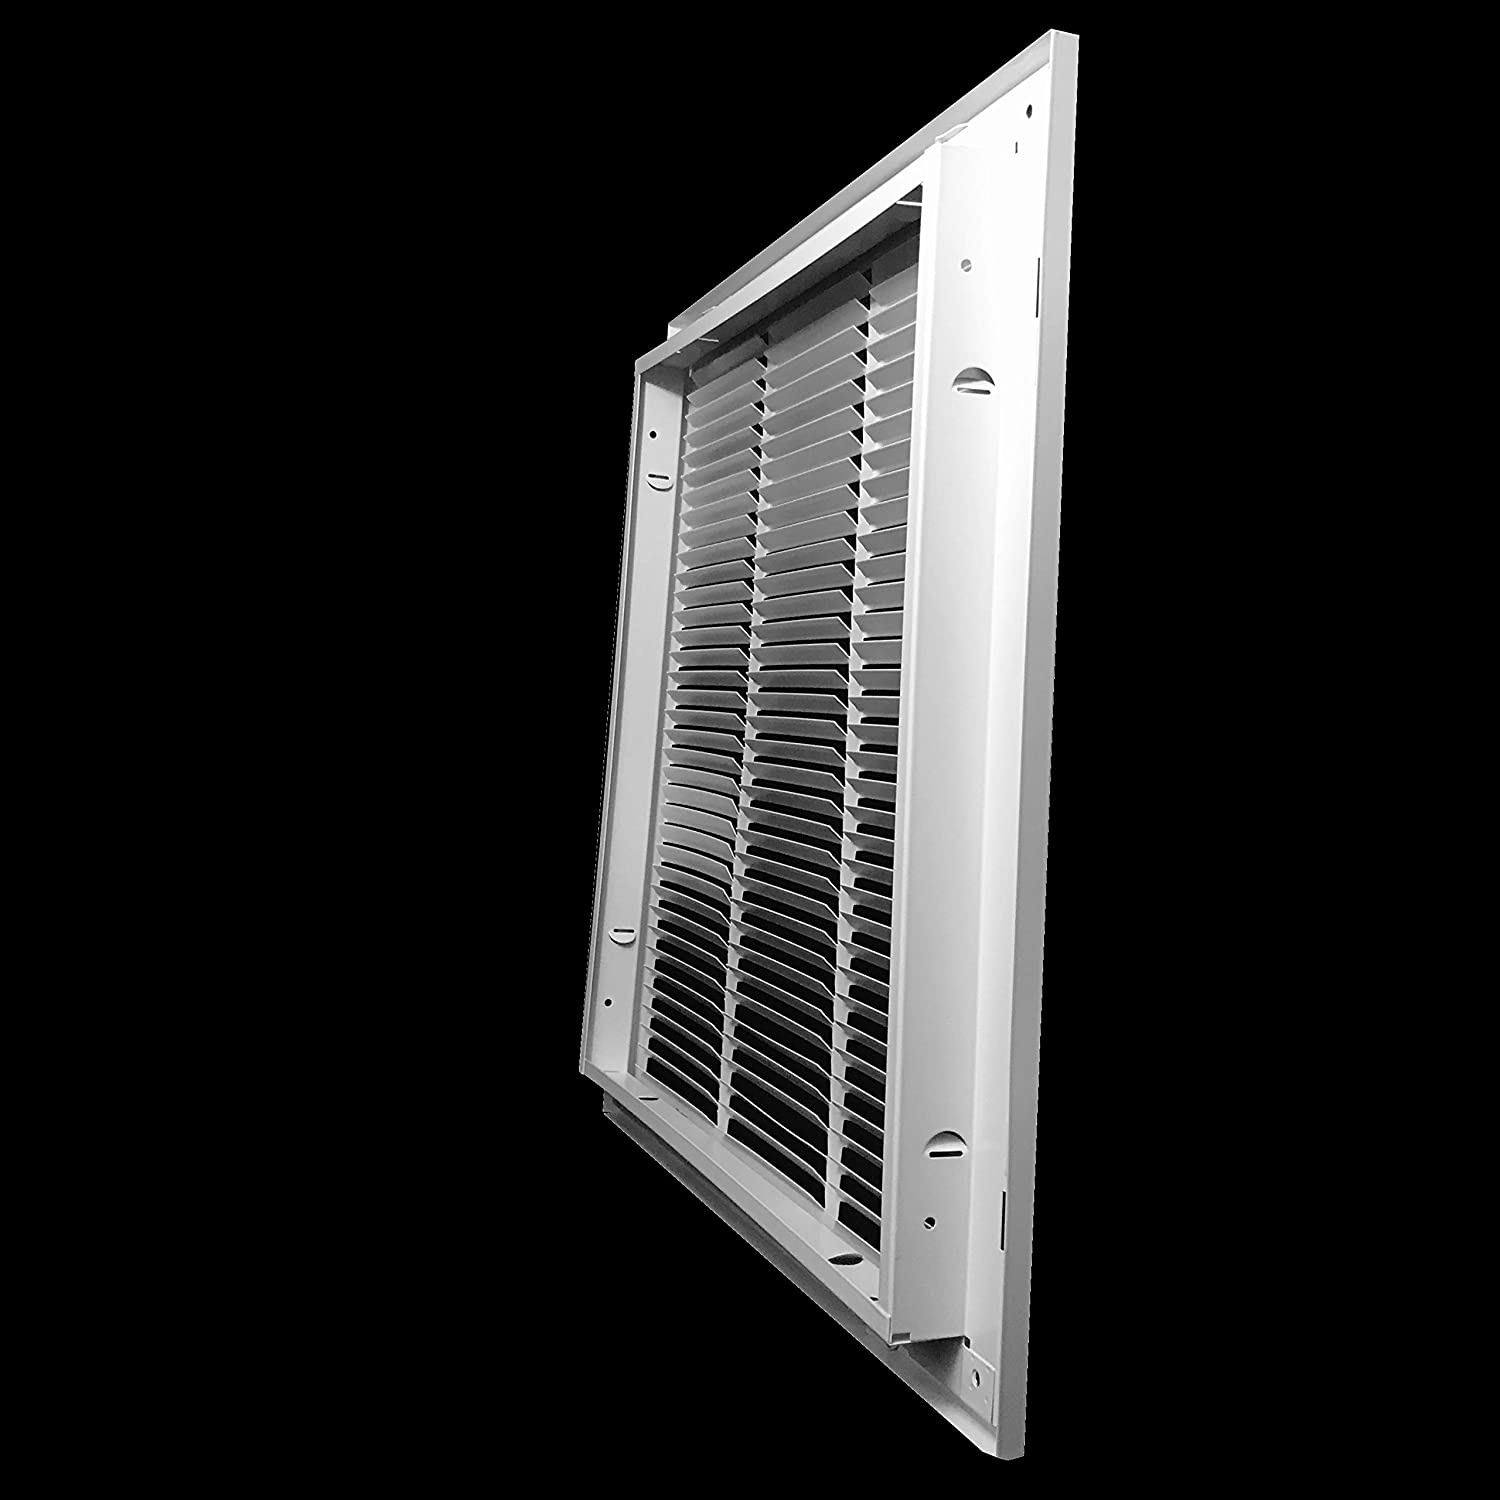 24" X 24" Duct Opening | Filter Included HD Steel Return Air Filter Grille for Sidewall and Ceiling